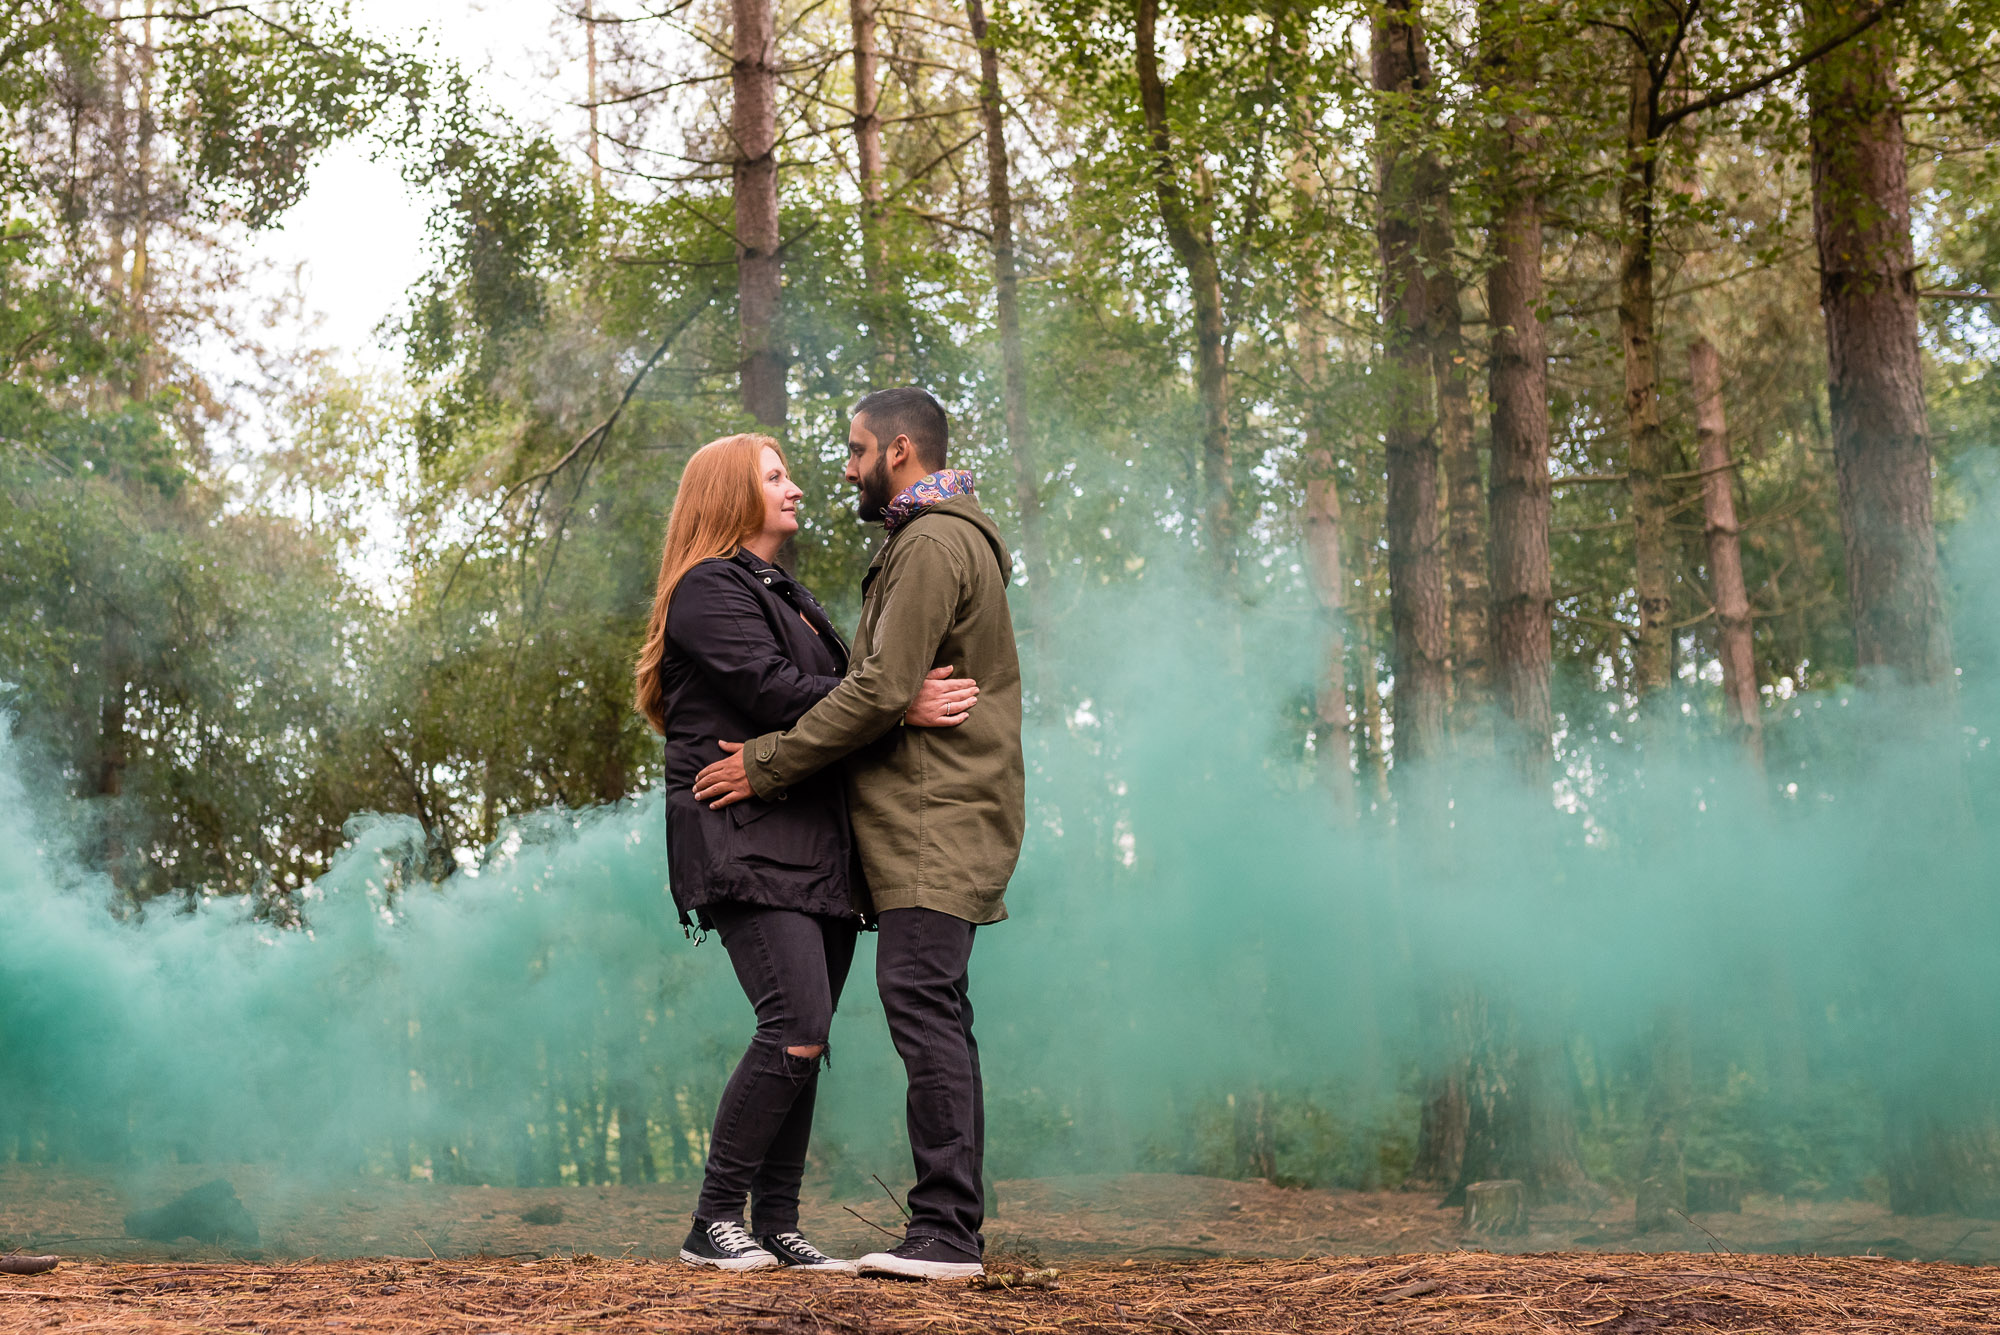 Smoke in Delamere Forest